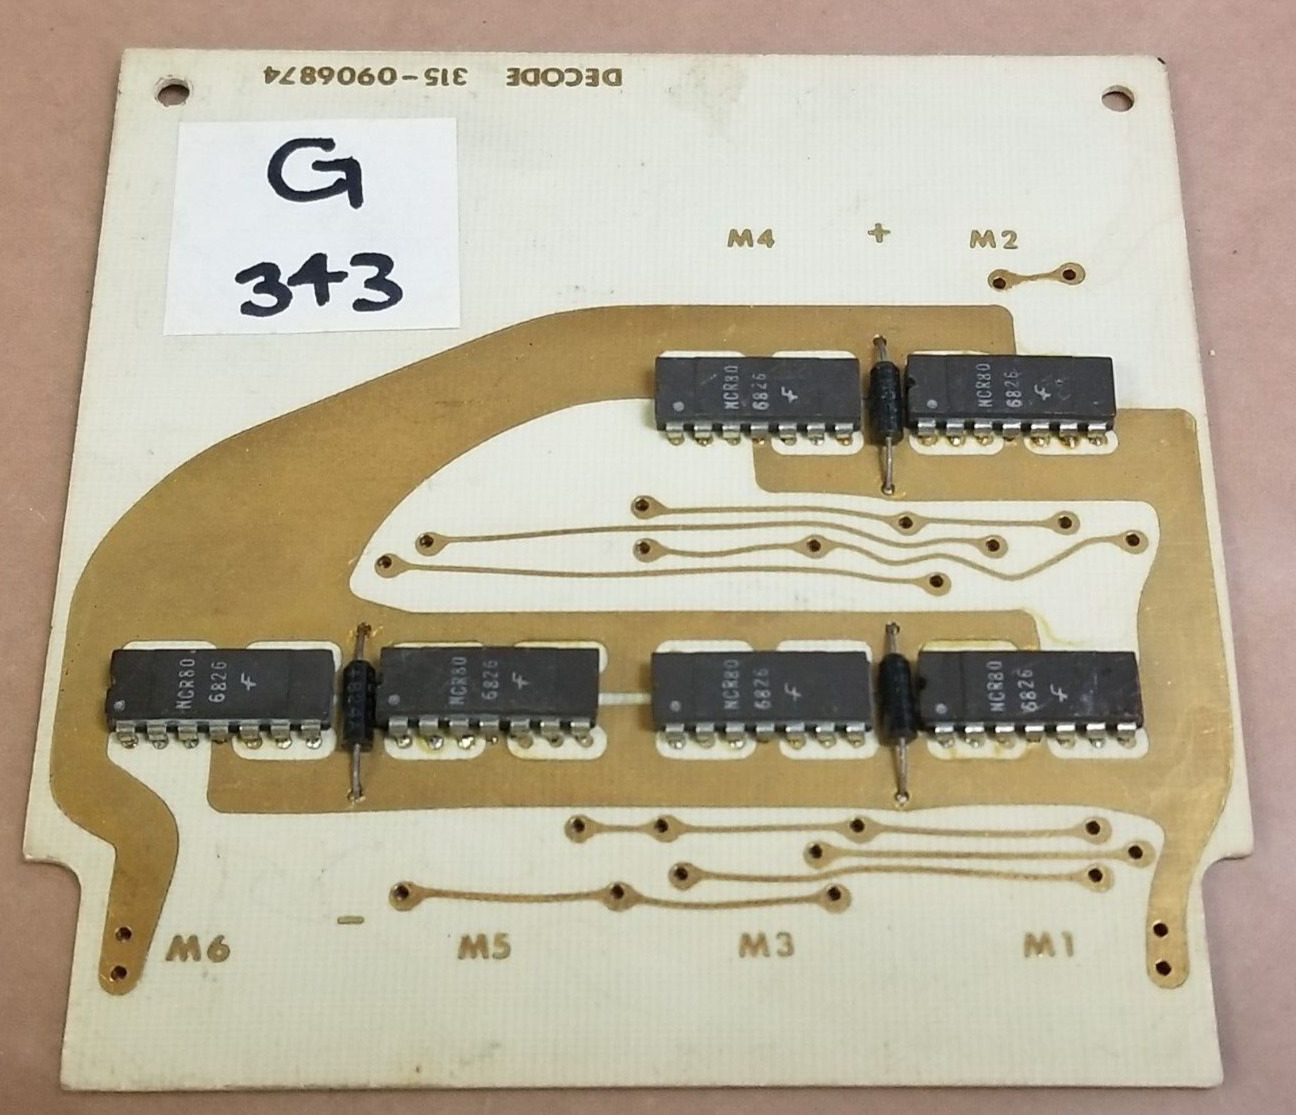 VERY RARE 1968 NCR Century 100 Decode Card GOLD PLATED PCB 315-0906874 #G343